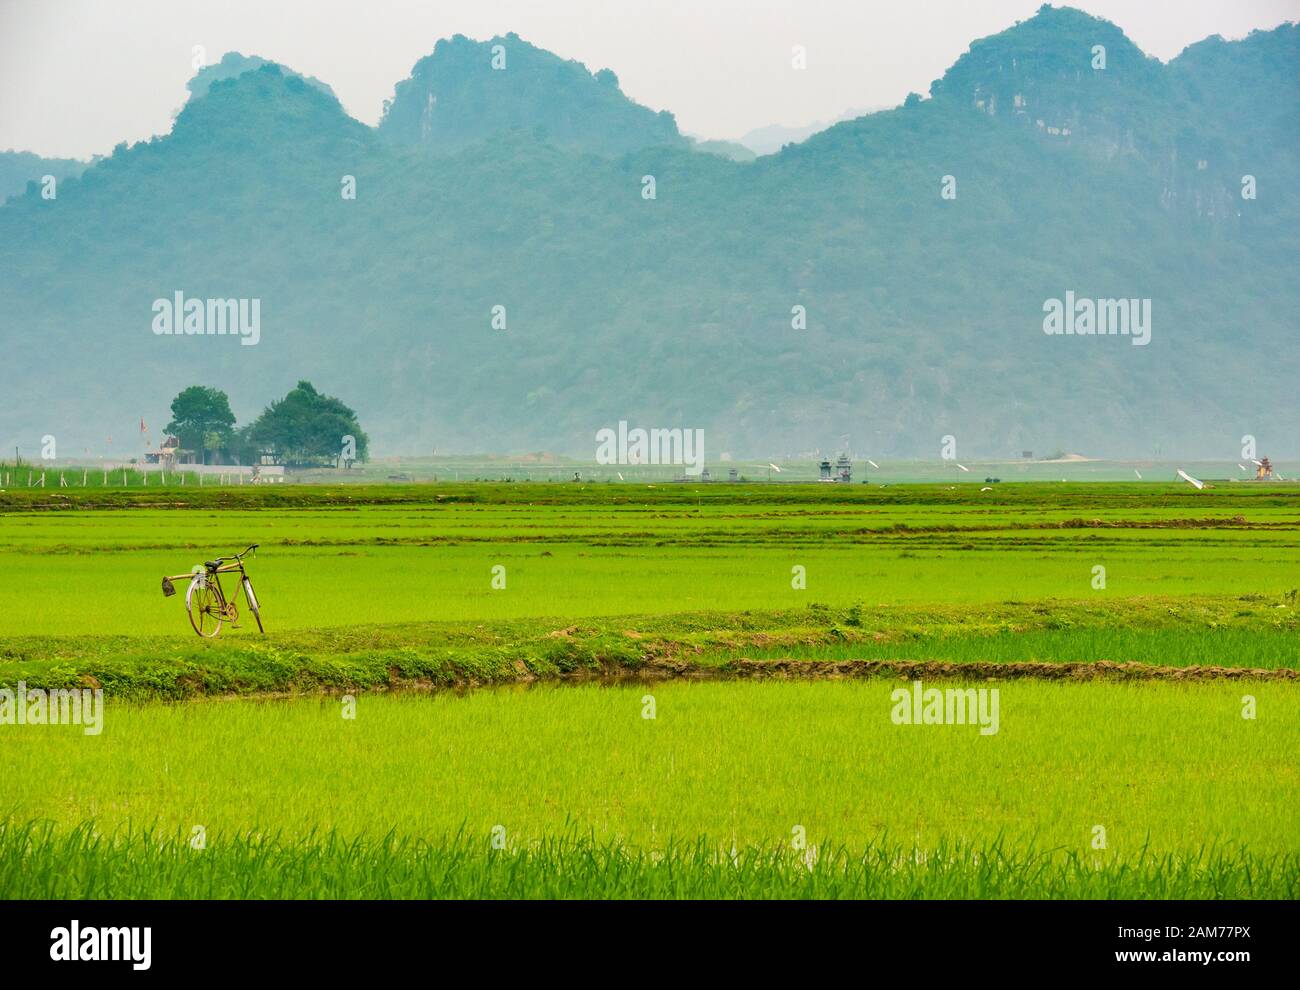 Parked old bicycle in rice paddy fields with view of limestone karst mountains in distance, Dong Tham, Ninh Binh, Vietnam, Asia Stock Photo